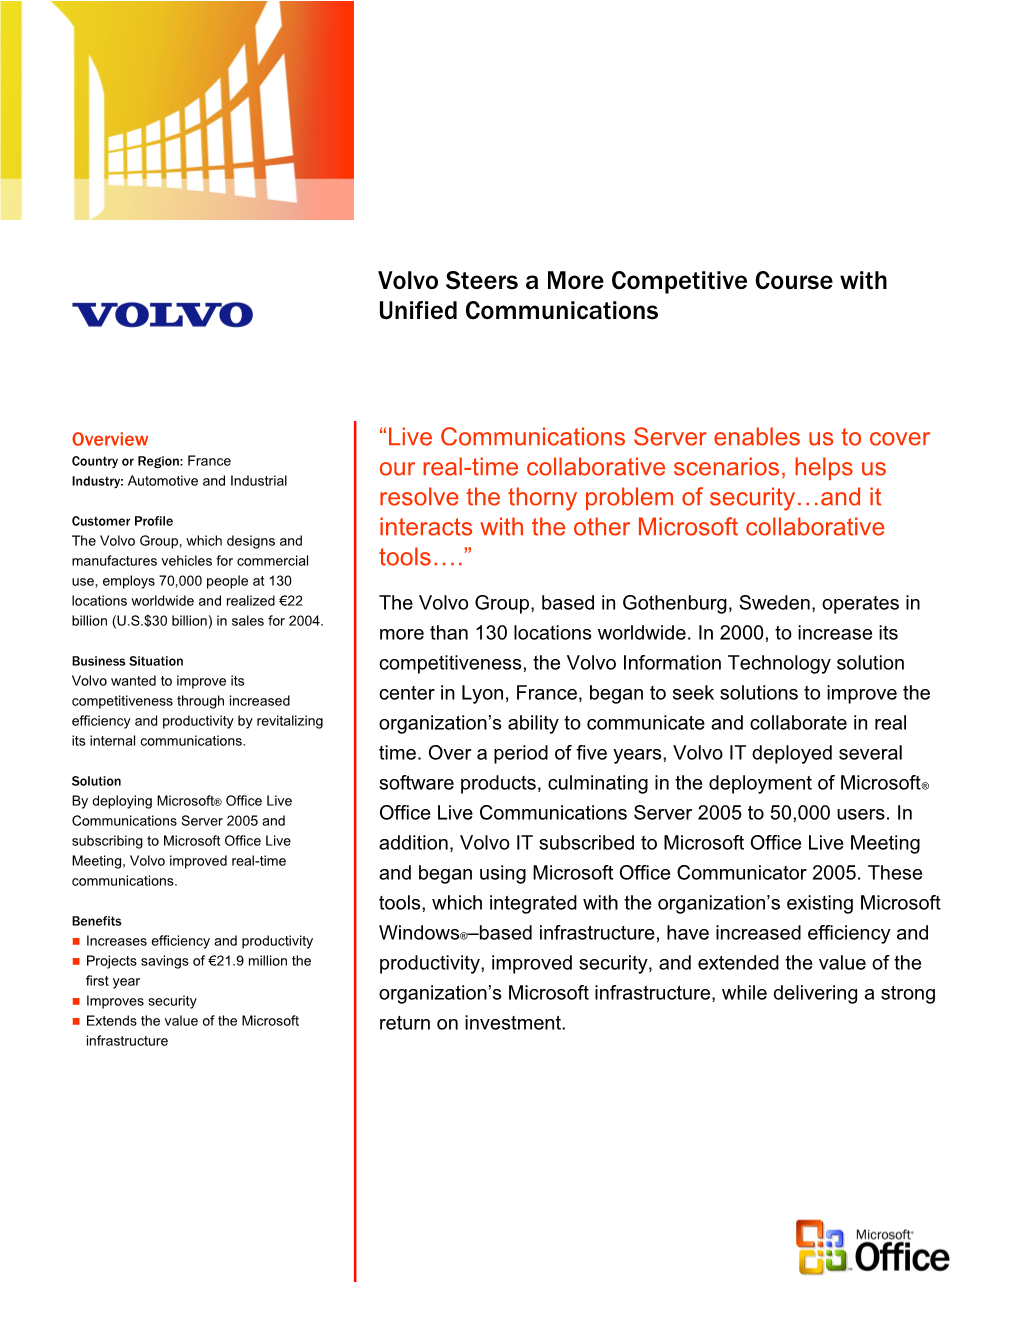 Volvo Steers a More Competitive Course with Unified Communications